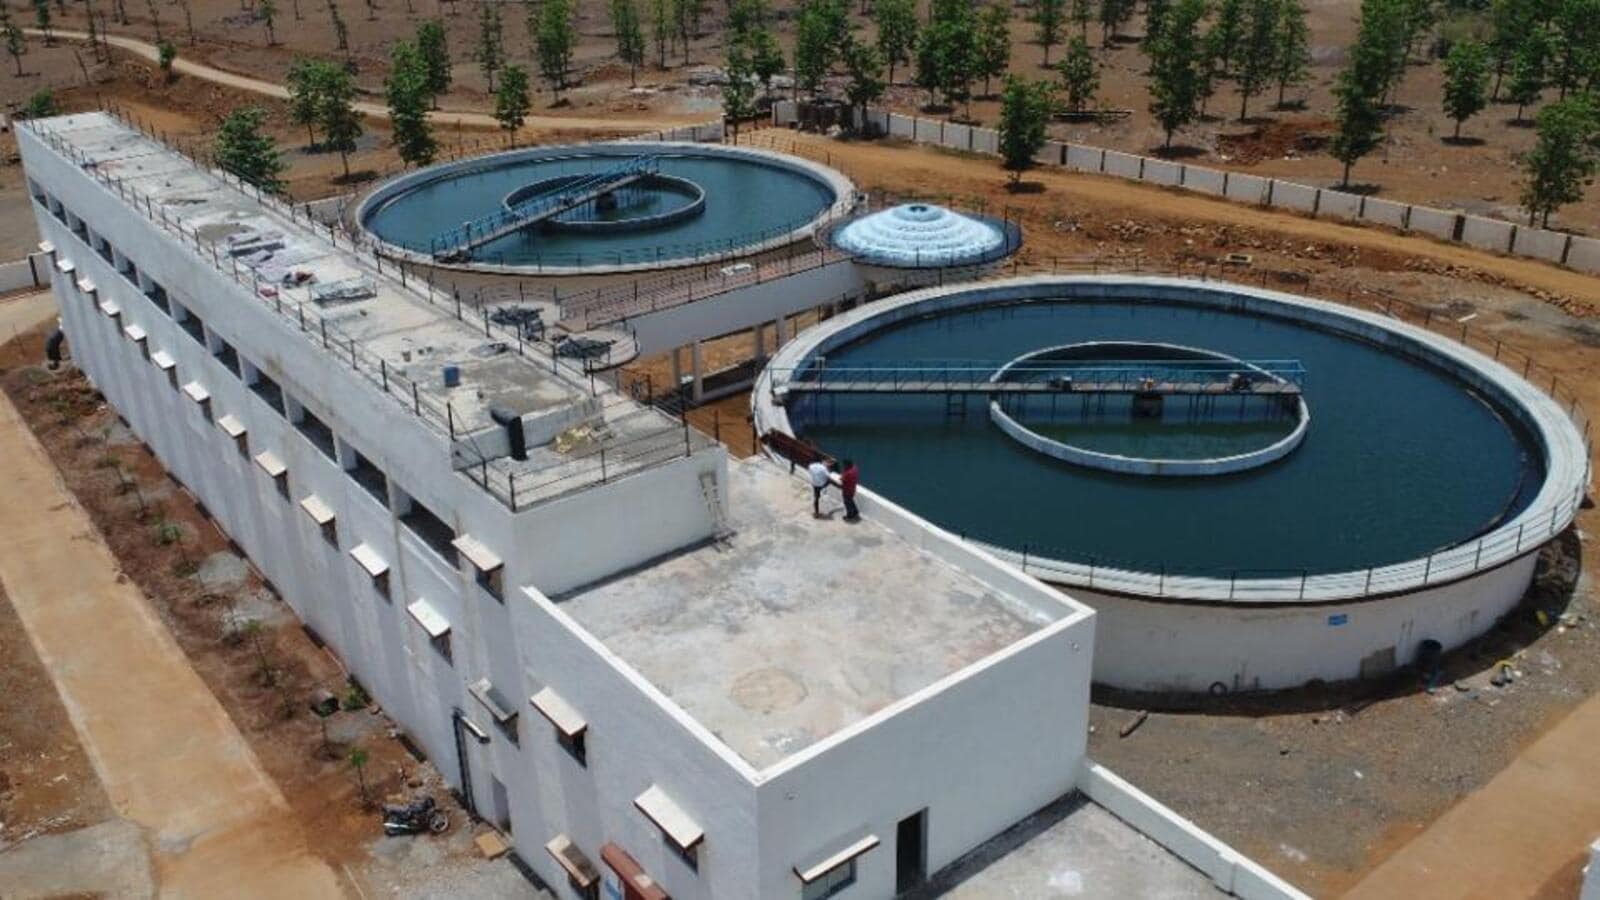 PM Modi to inaugurate project to provide tap water to 4.5 lakh tribal people in Gujarat